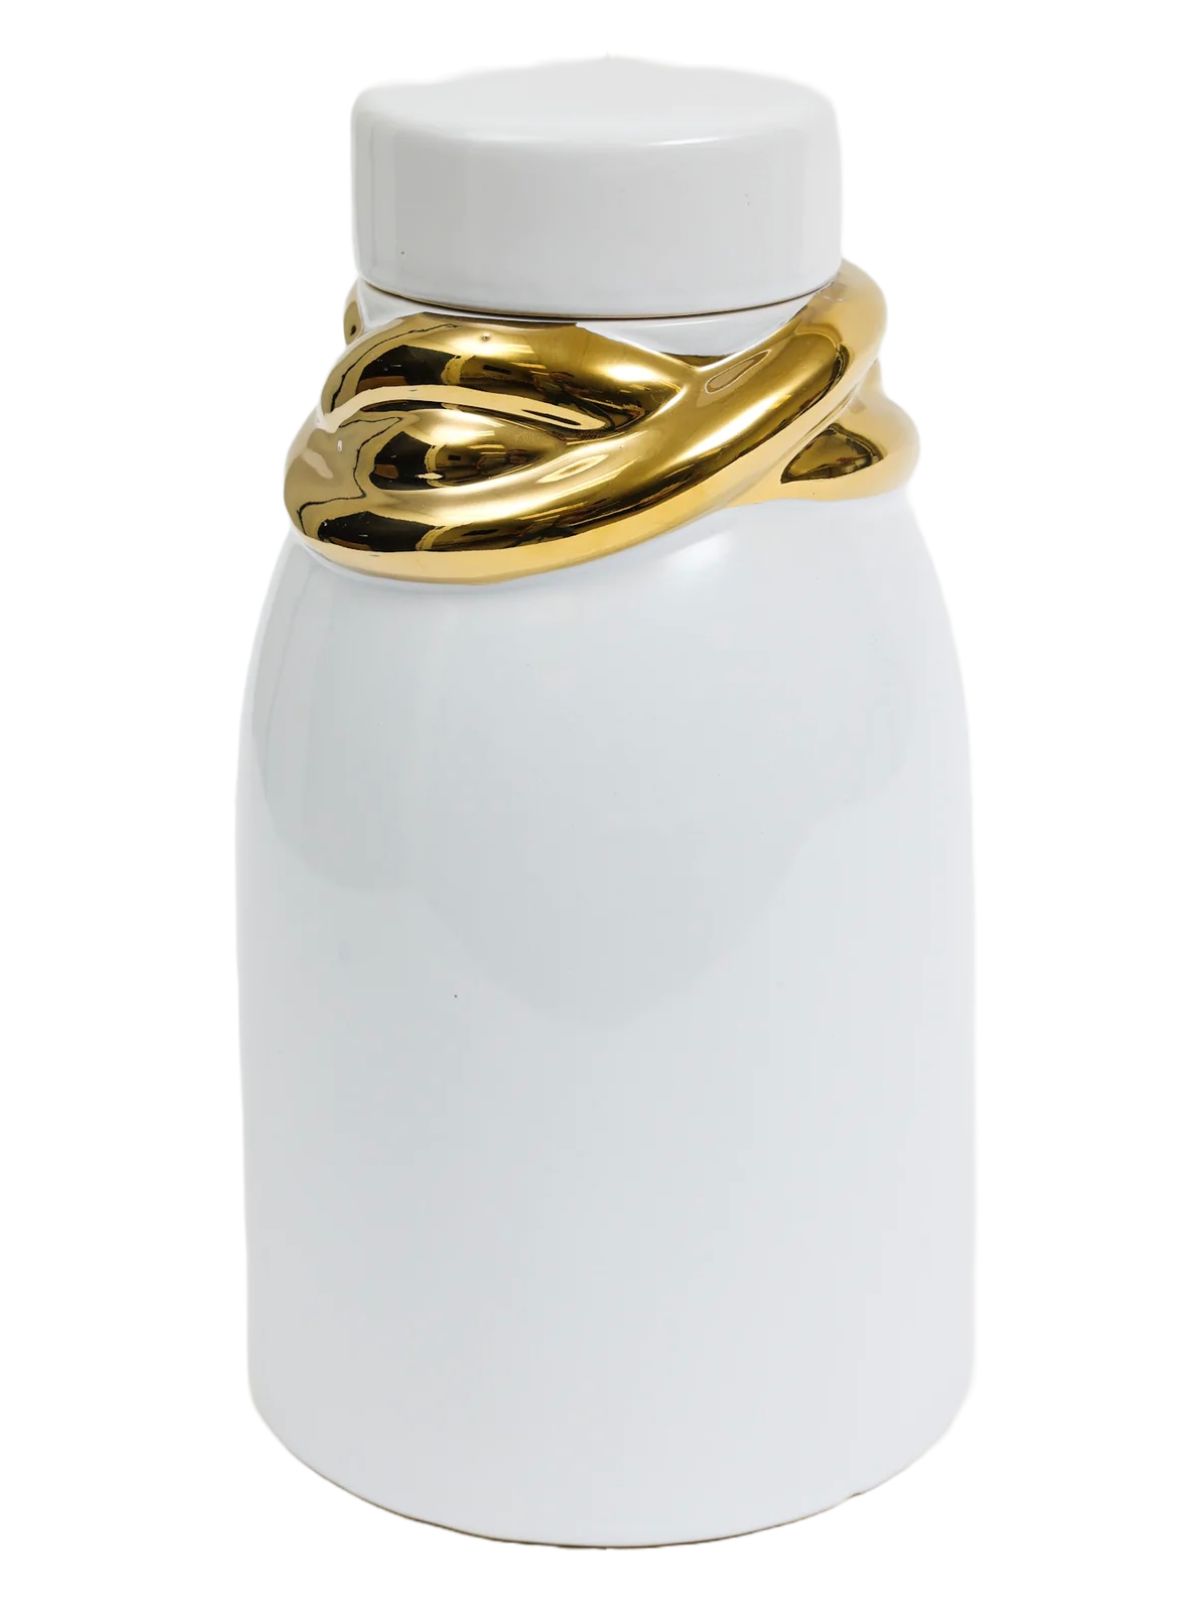 White Glossy Ceramic Lidded Jar with Stunning Gold Details, 7W x 12H.